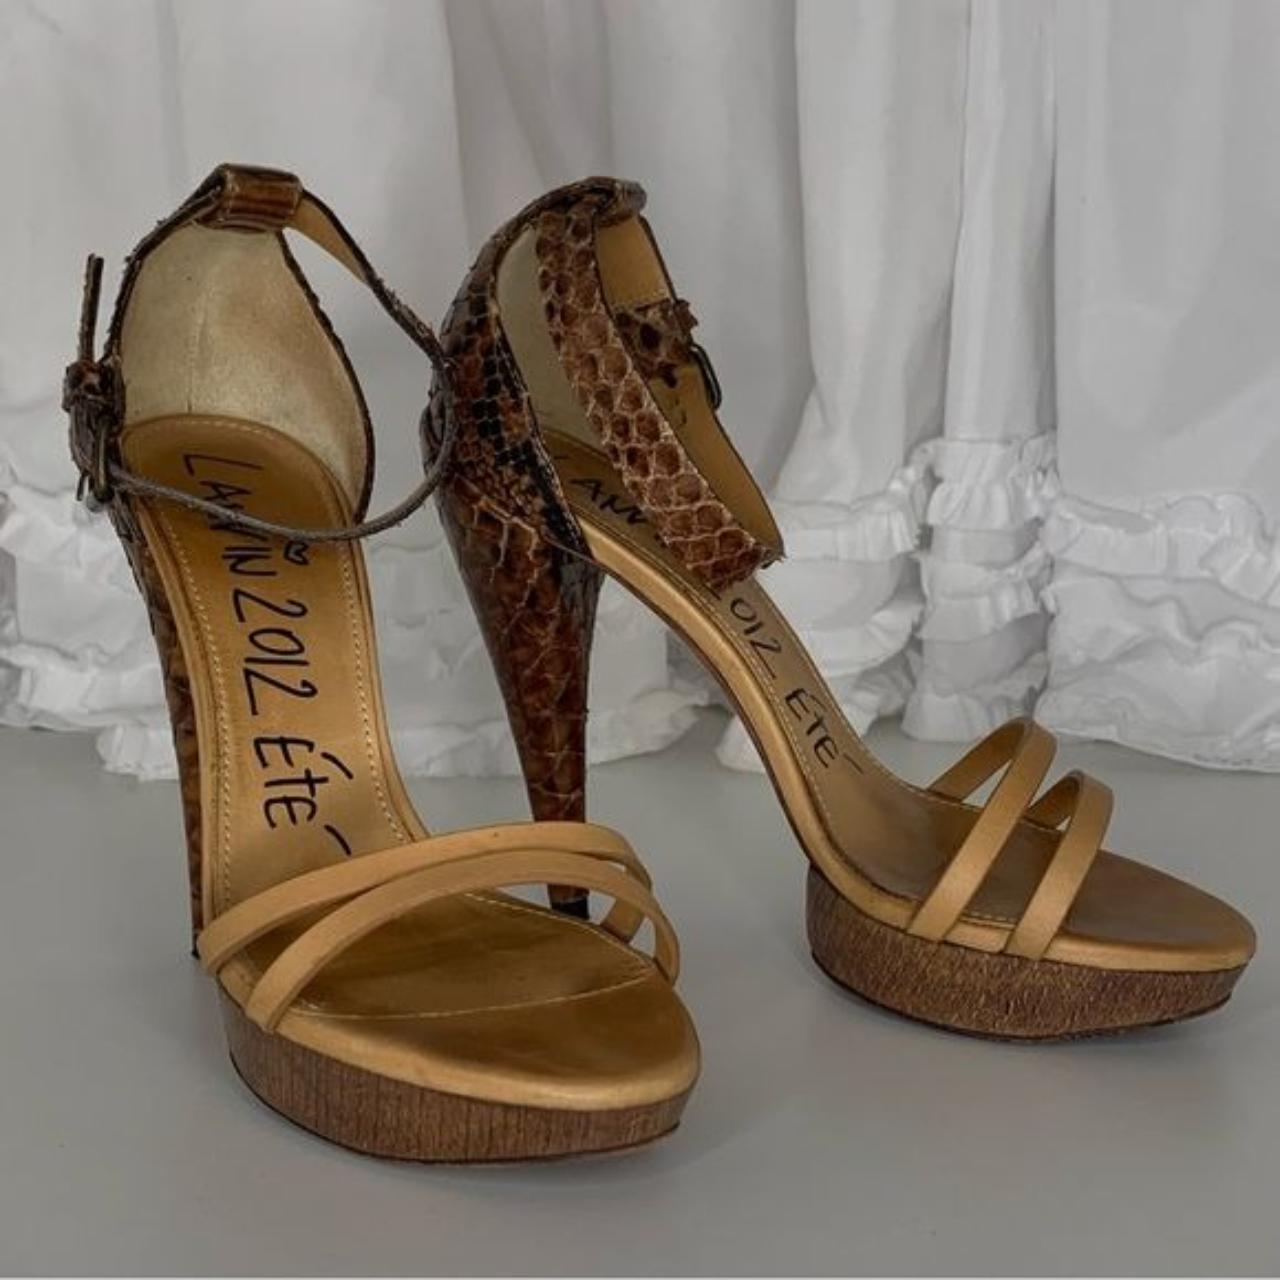 Lanvin Women's Tan and Brown Sandals